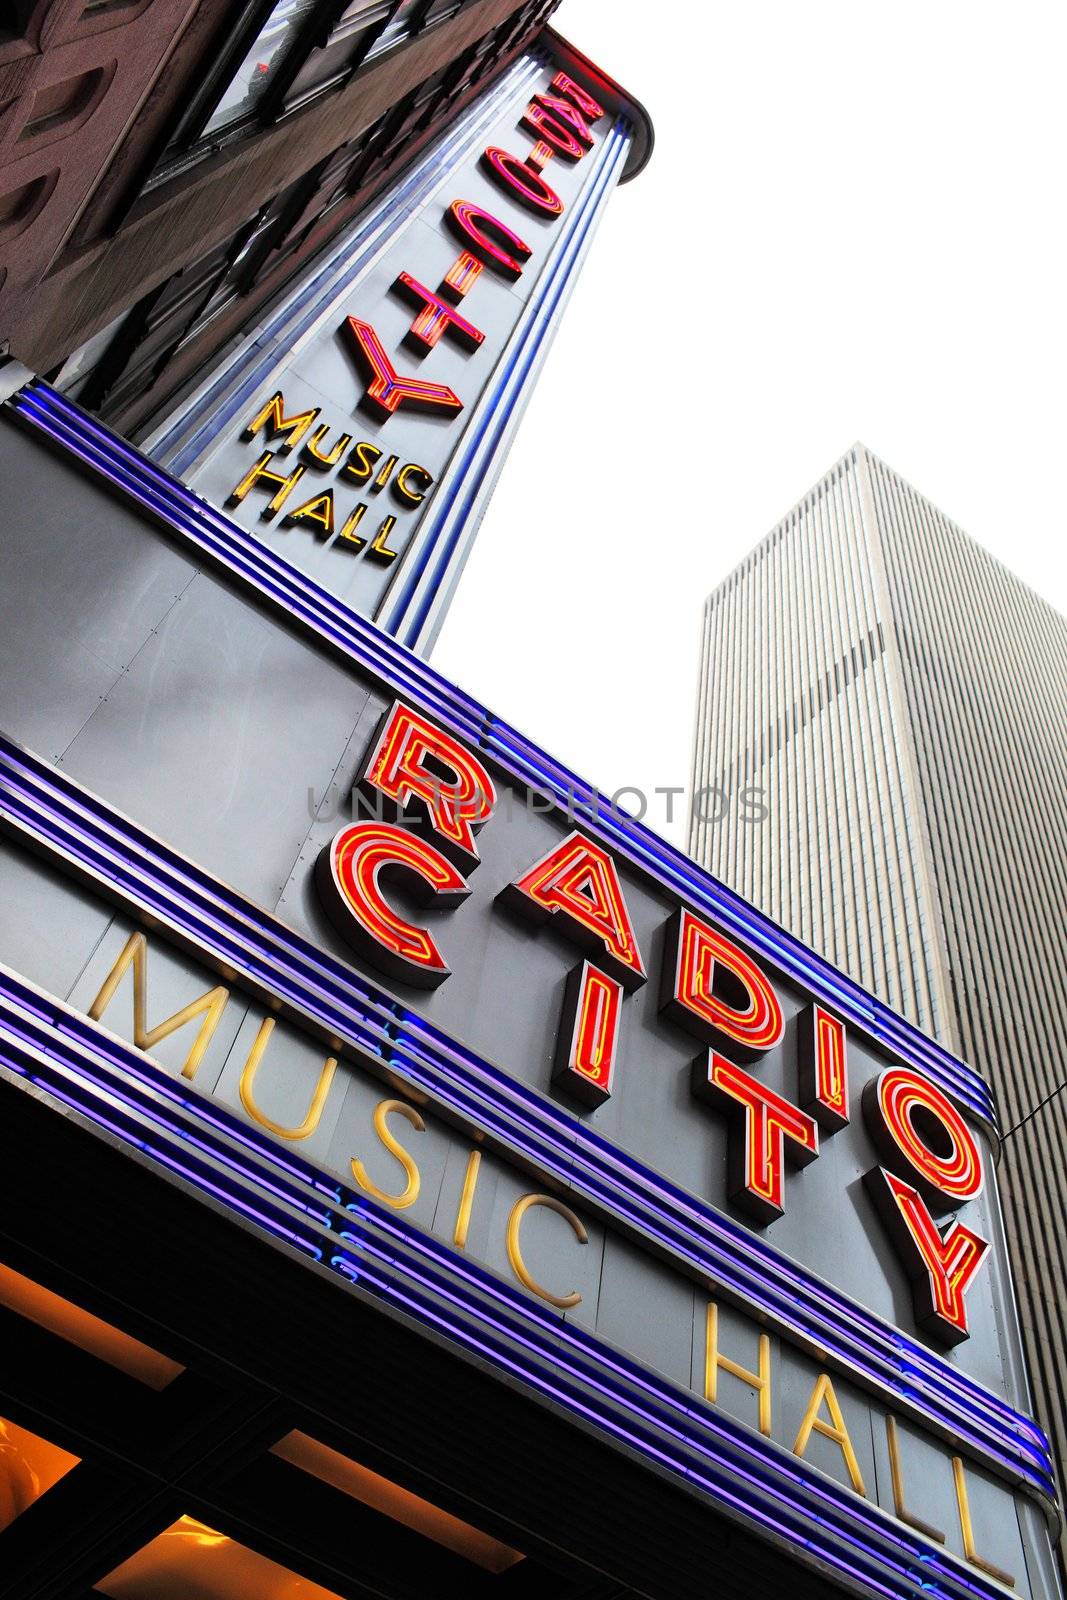 NEW YORK CITY, USA - JUNE 8: Radio City Music Hall is an entertainment venue located in Rockefeller Center in New York City. Its nickname is the Showplace of the Nation, and it was for a time the leading tourist destination in the city. June 8, 2012 in New York City, USA